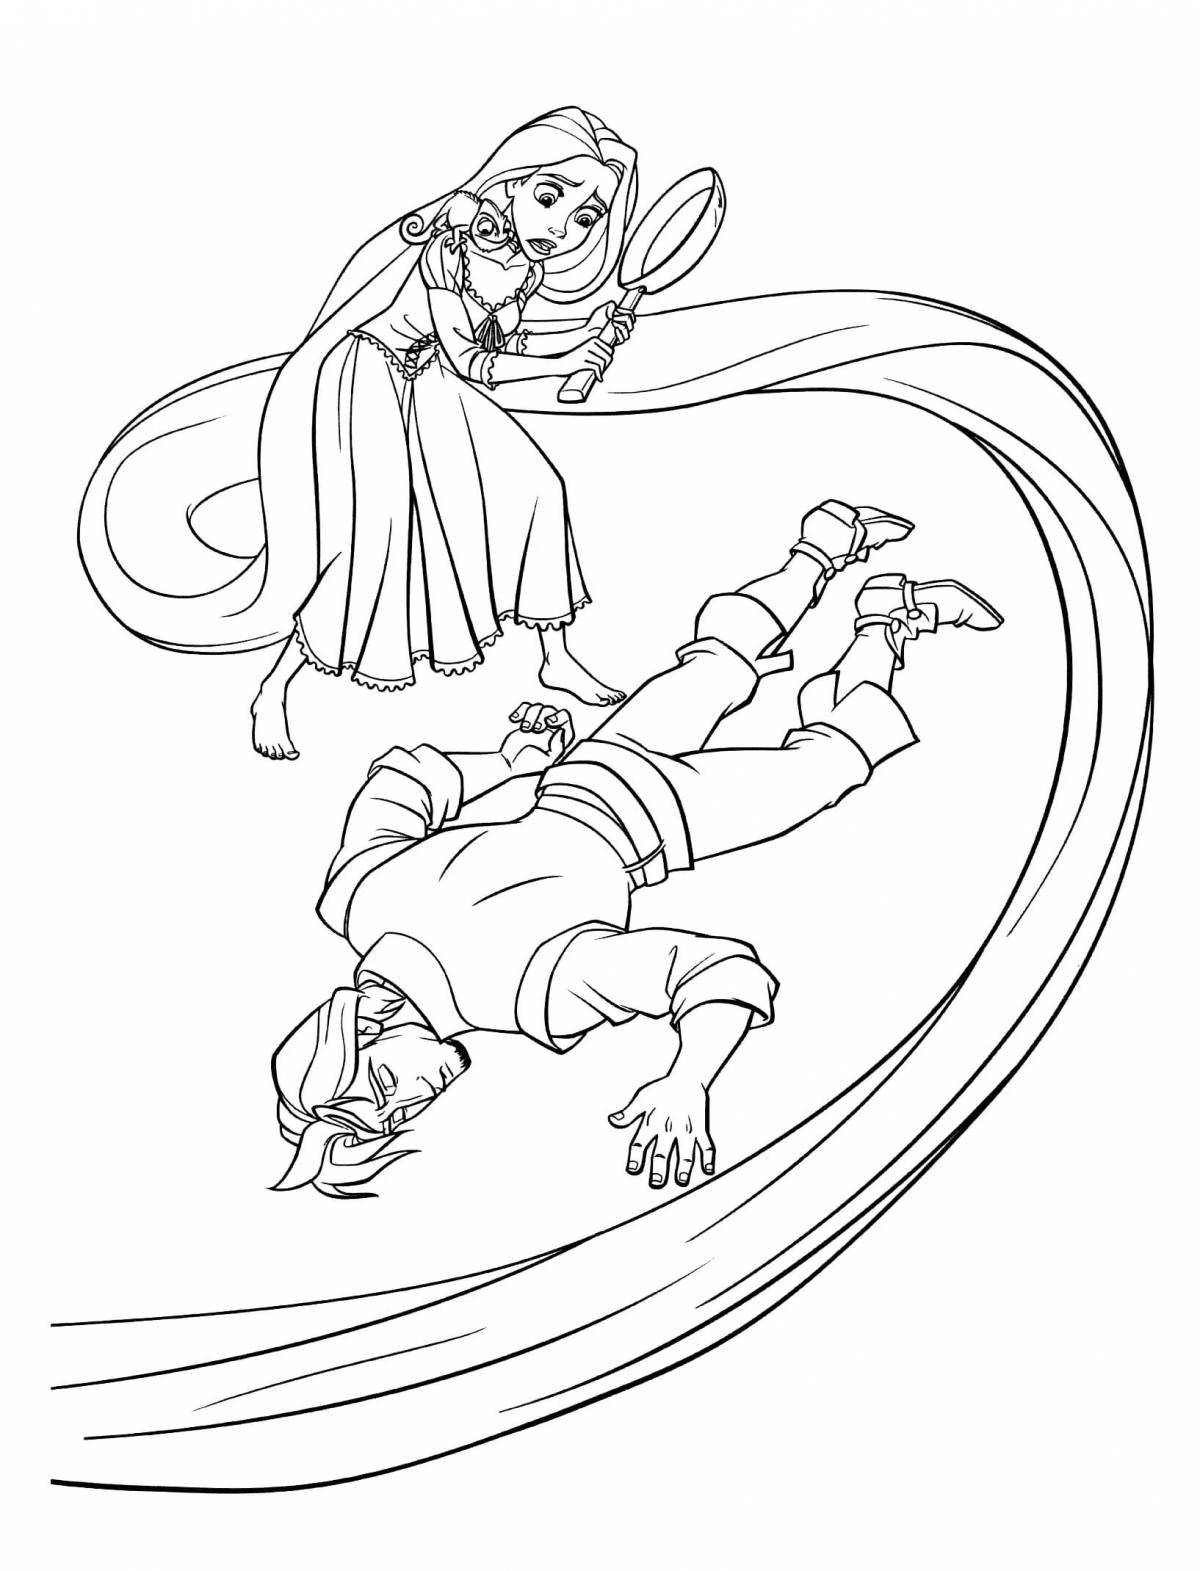 Animated rapunzel coloring game